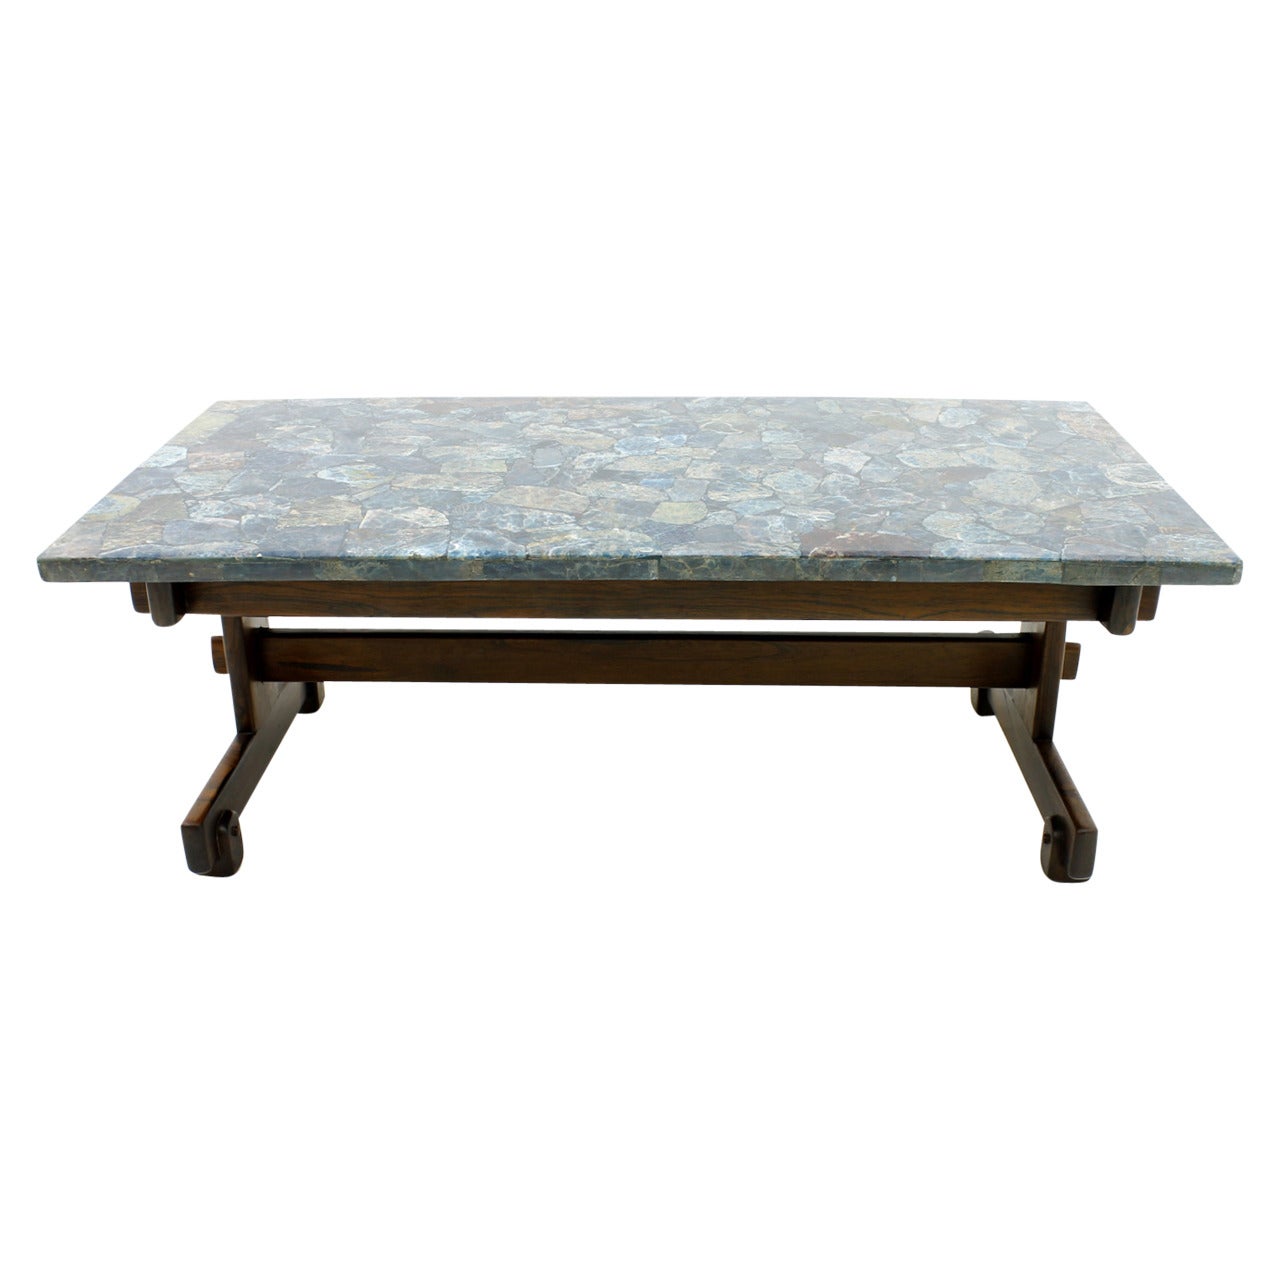 Rare Sergio Rodrigues Coffee Table with Apatit Stone Mosaic Top, Brazil 1964 For Sale